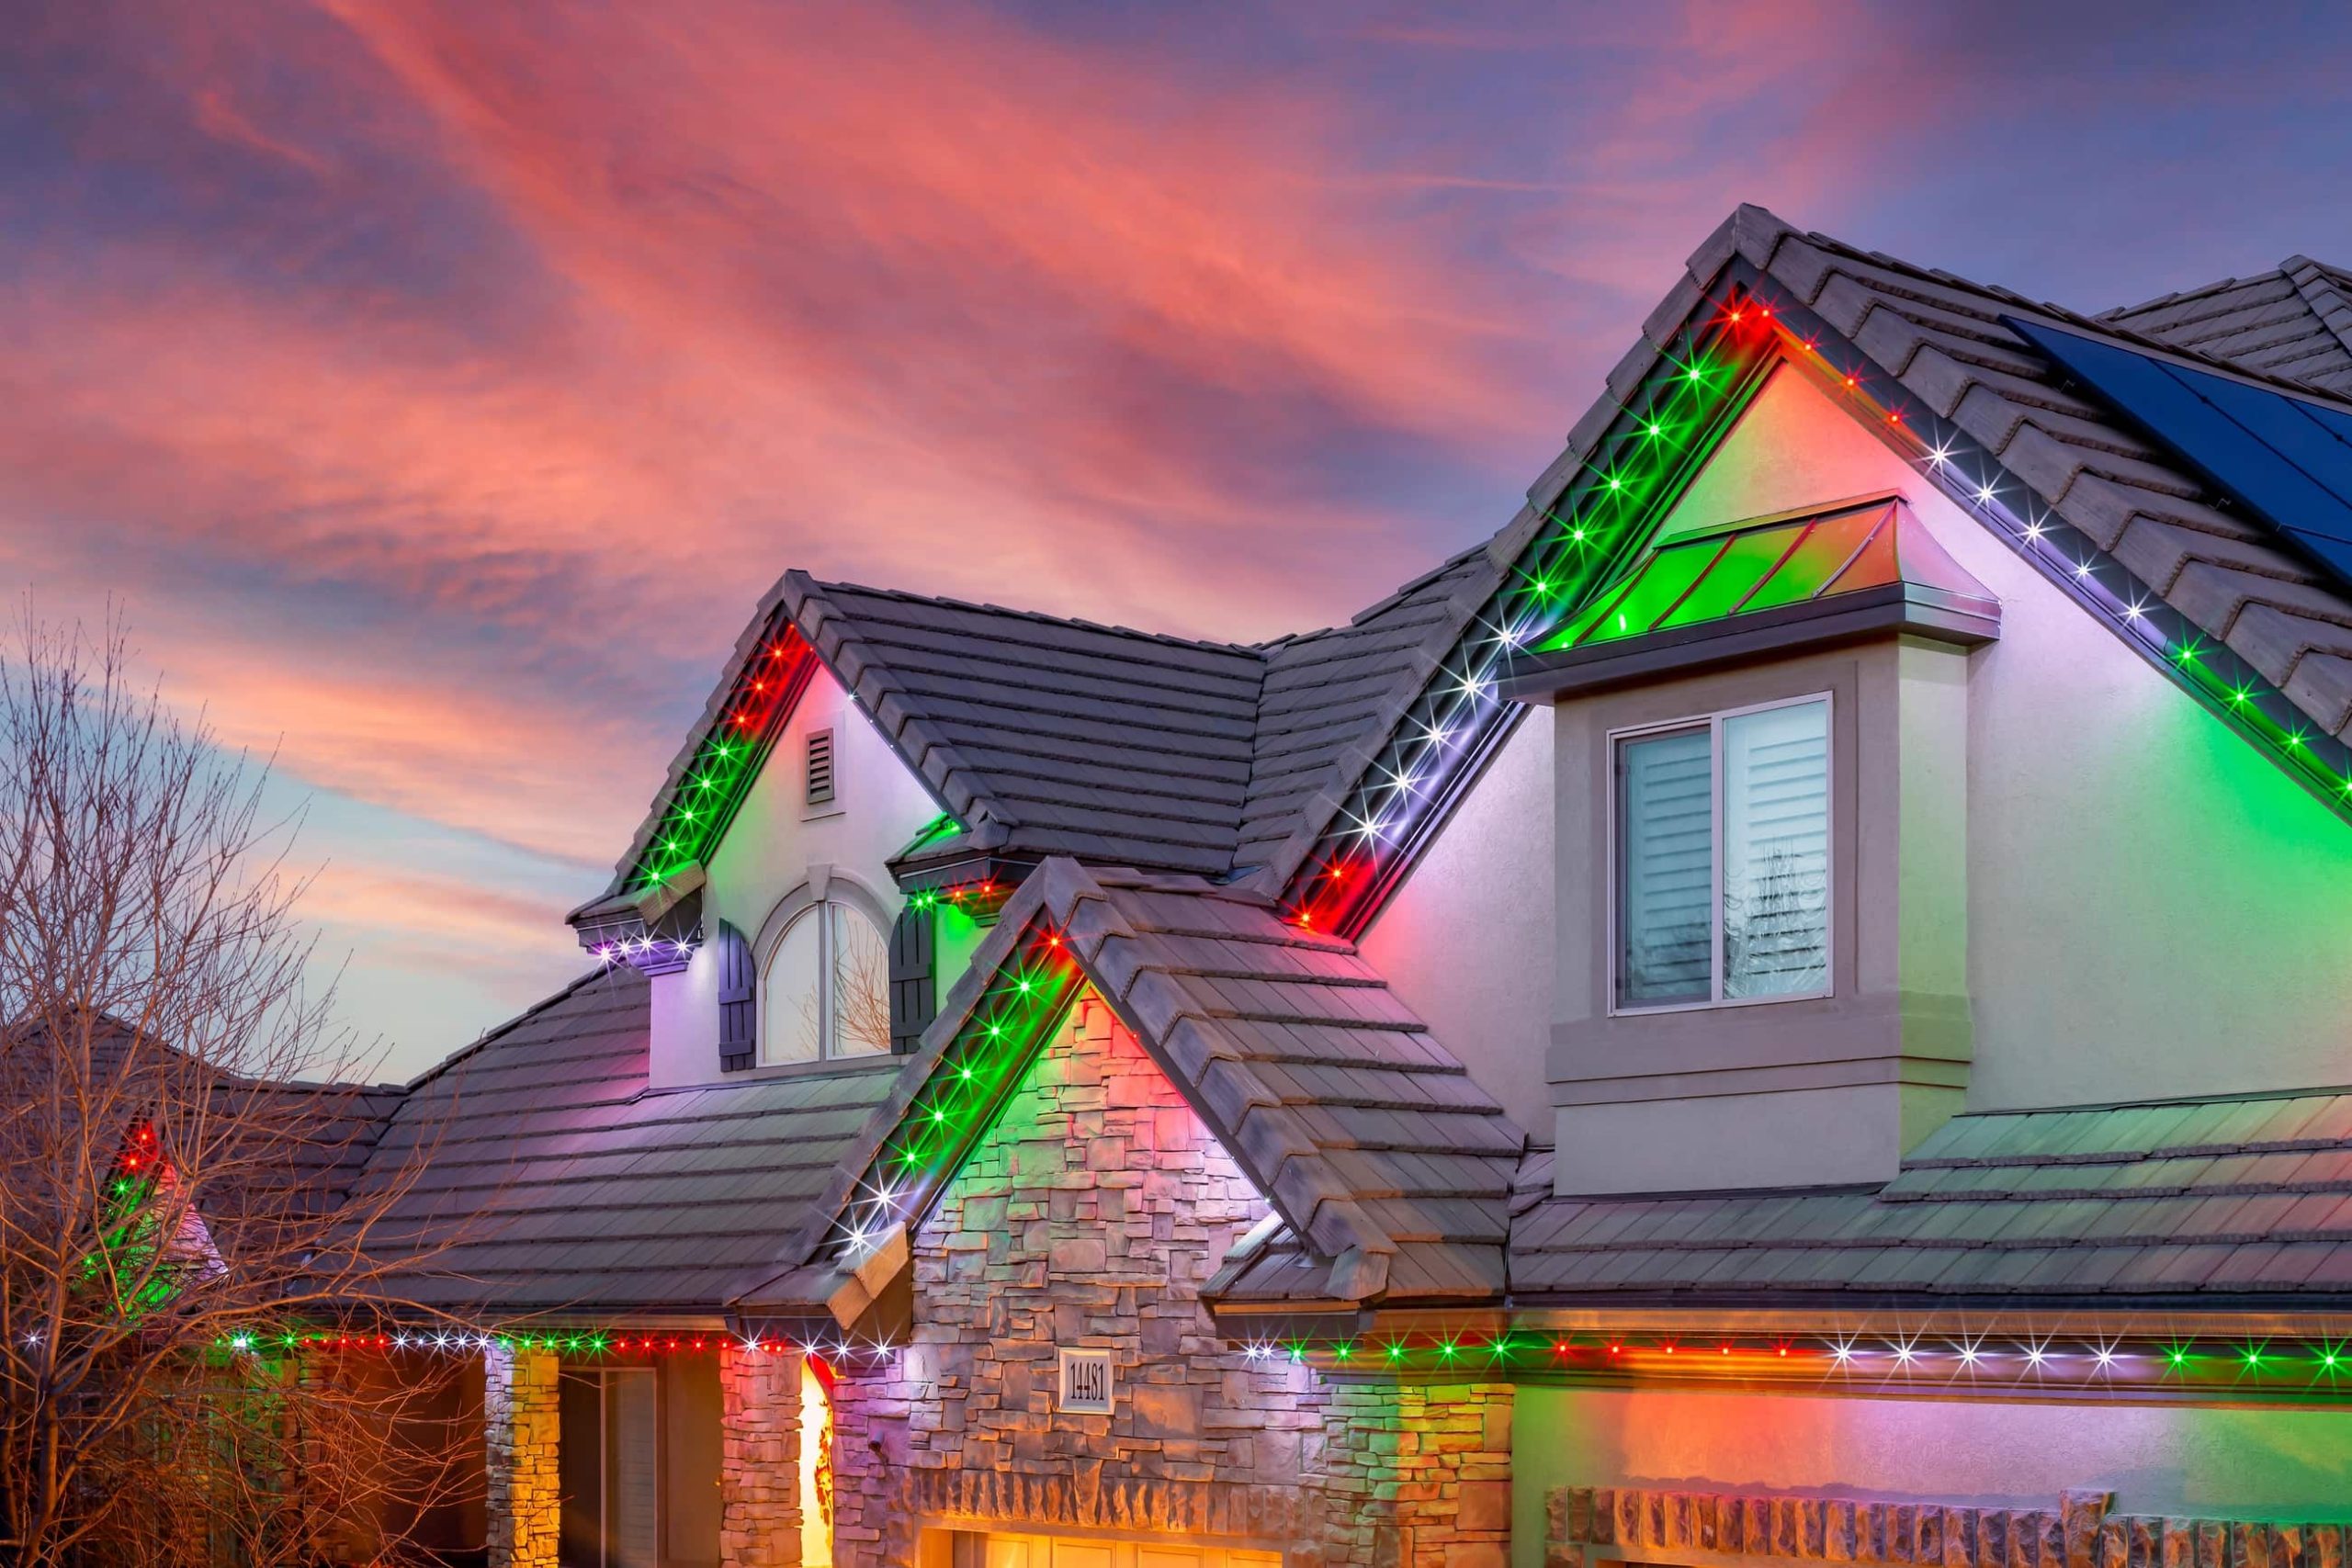 What types of properties can benefit from holiday lighting services?